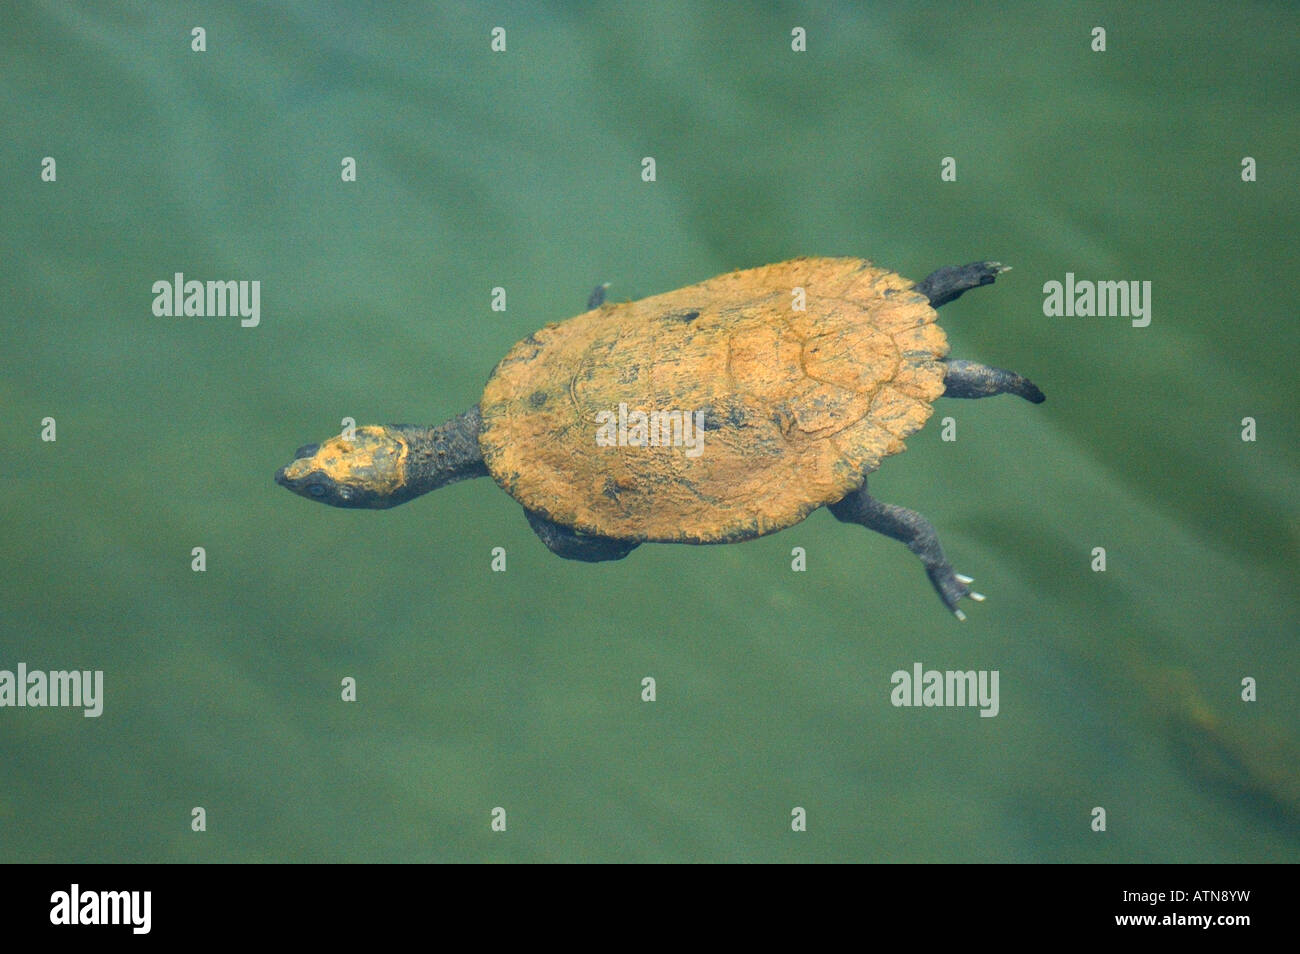 A Saw-shelled Turtle diving in Lake Eacham on the Atherton Tablelands, Queensland, Australia Stock Photo